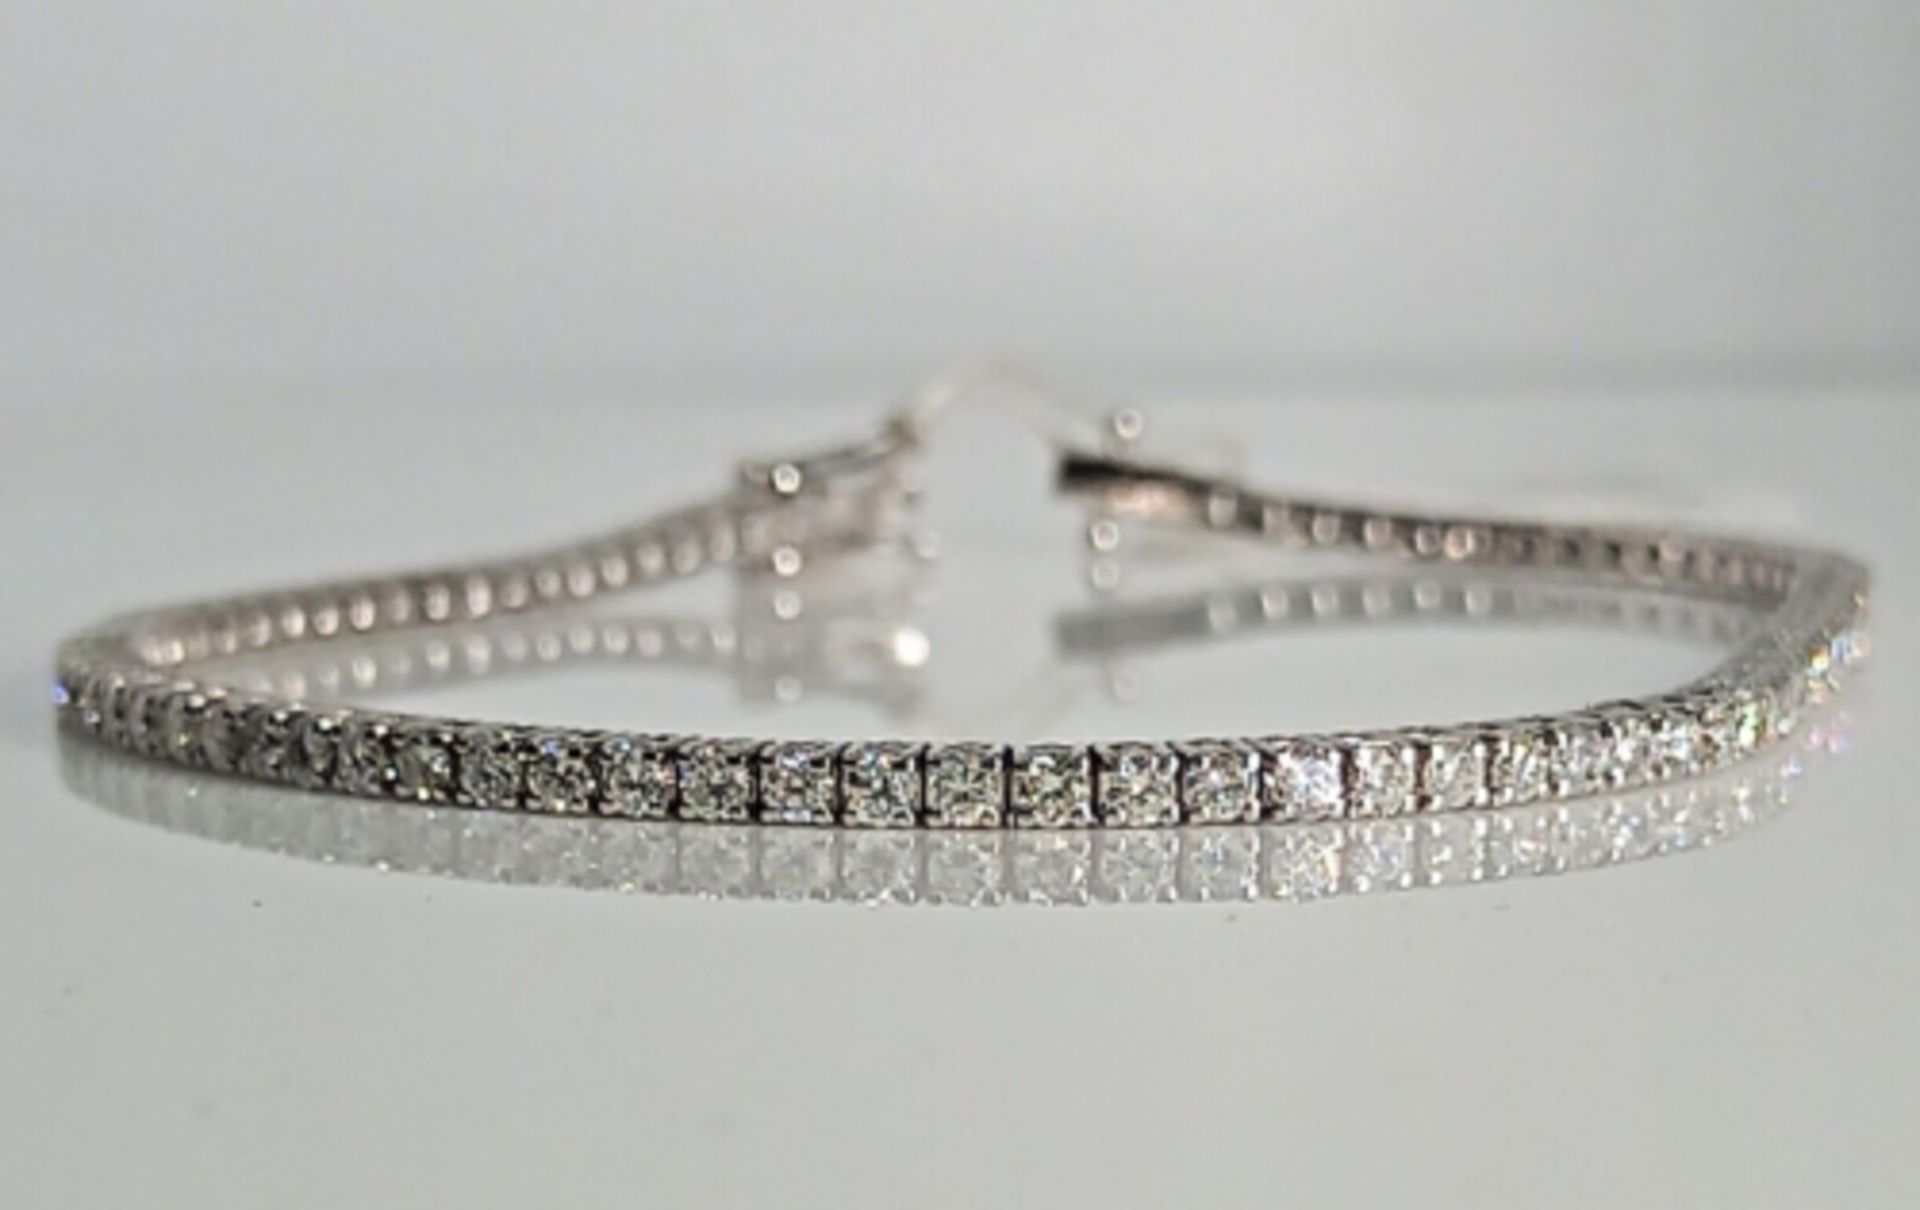 1.84 DIAMOND TENNIS BRACELET 18CT WHITE GOLD IN GIFT BOX WITH VALUATION CERTIFICATE OF £4,995